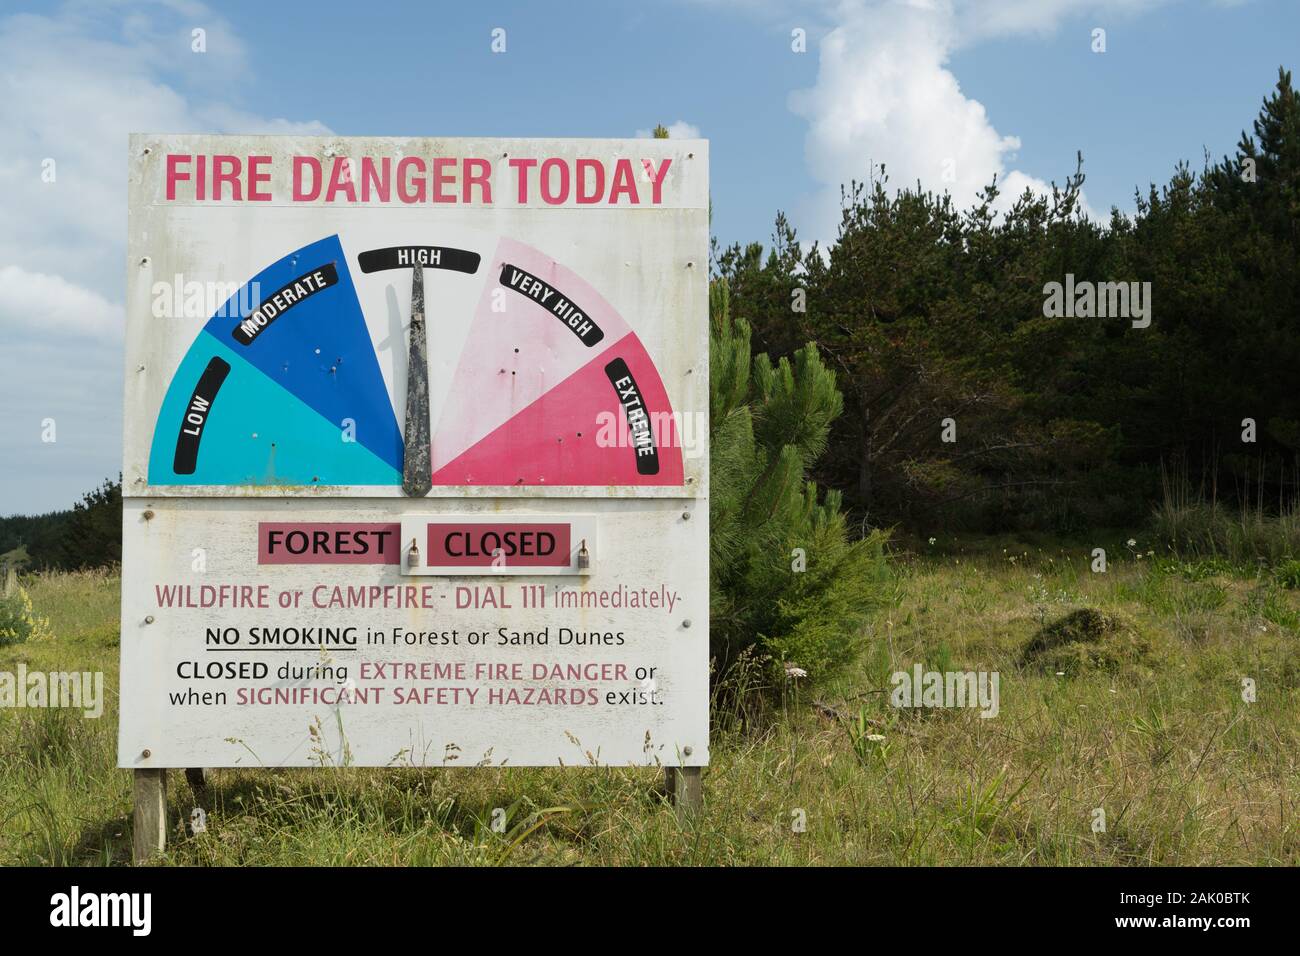 Muriwai, West Coast, Auckland, Northland, New Zealand. High fire danger today forest closed no smoking no campfires warning sign extreme very high Stock Photo